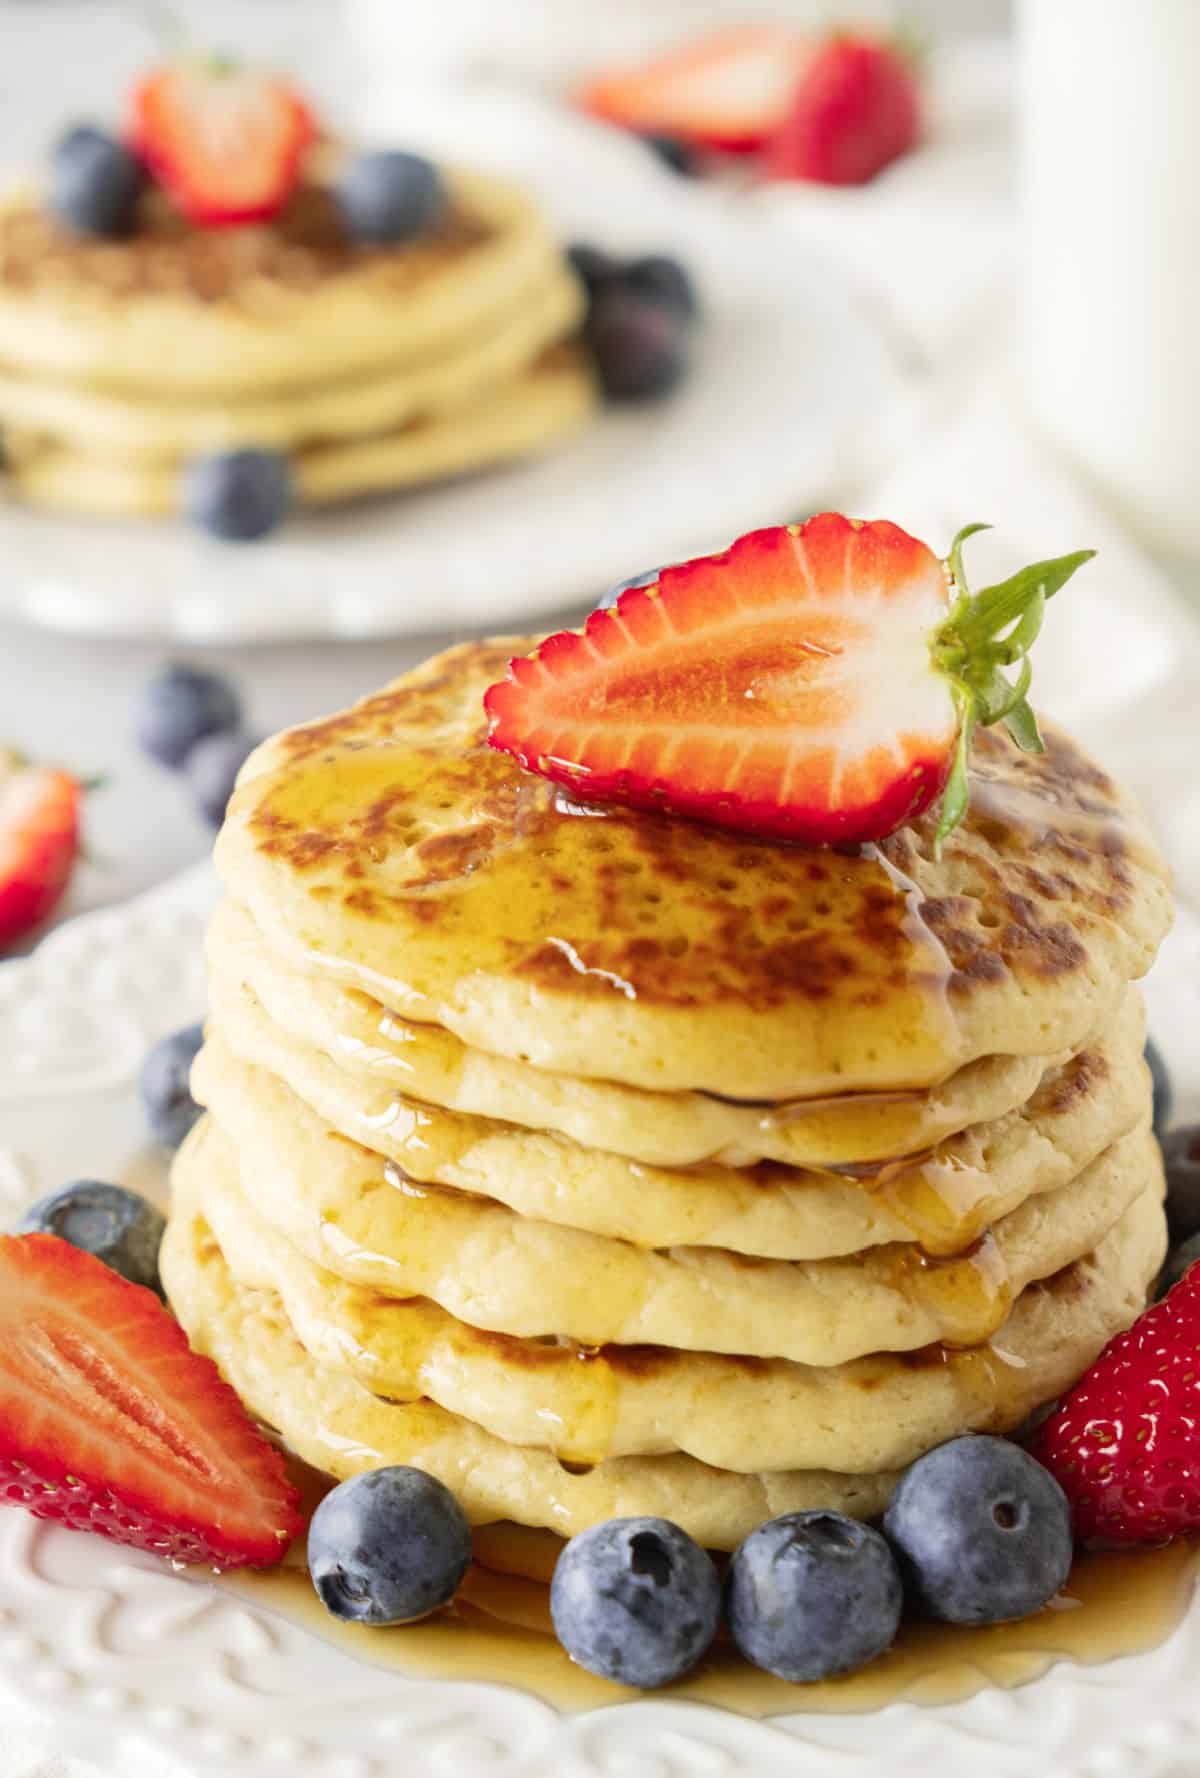 Pancakes in a stack with syrup and fresh berries on white plates.